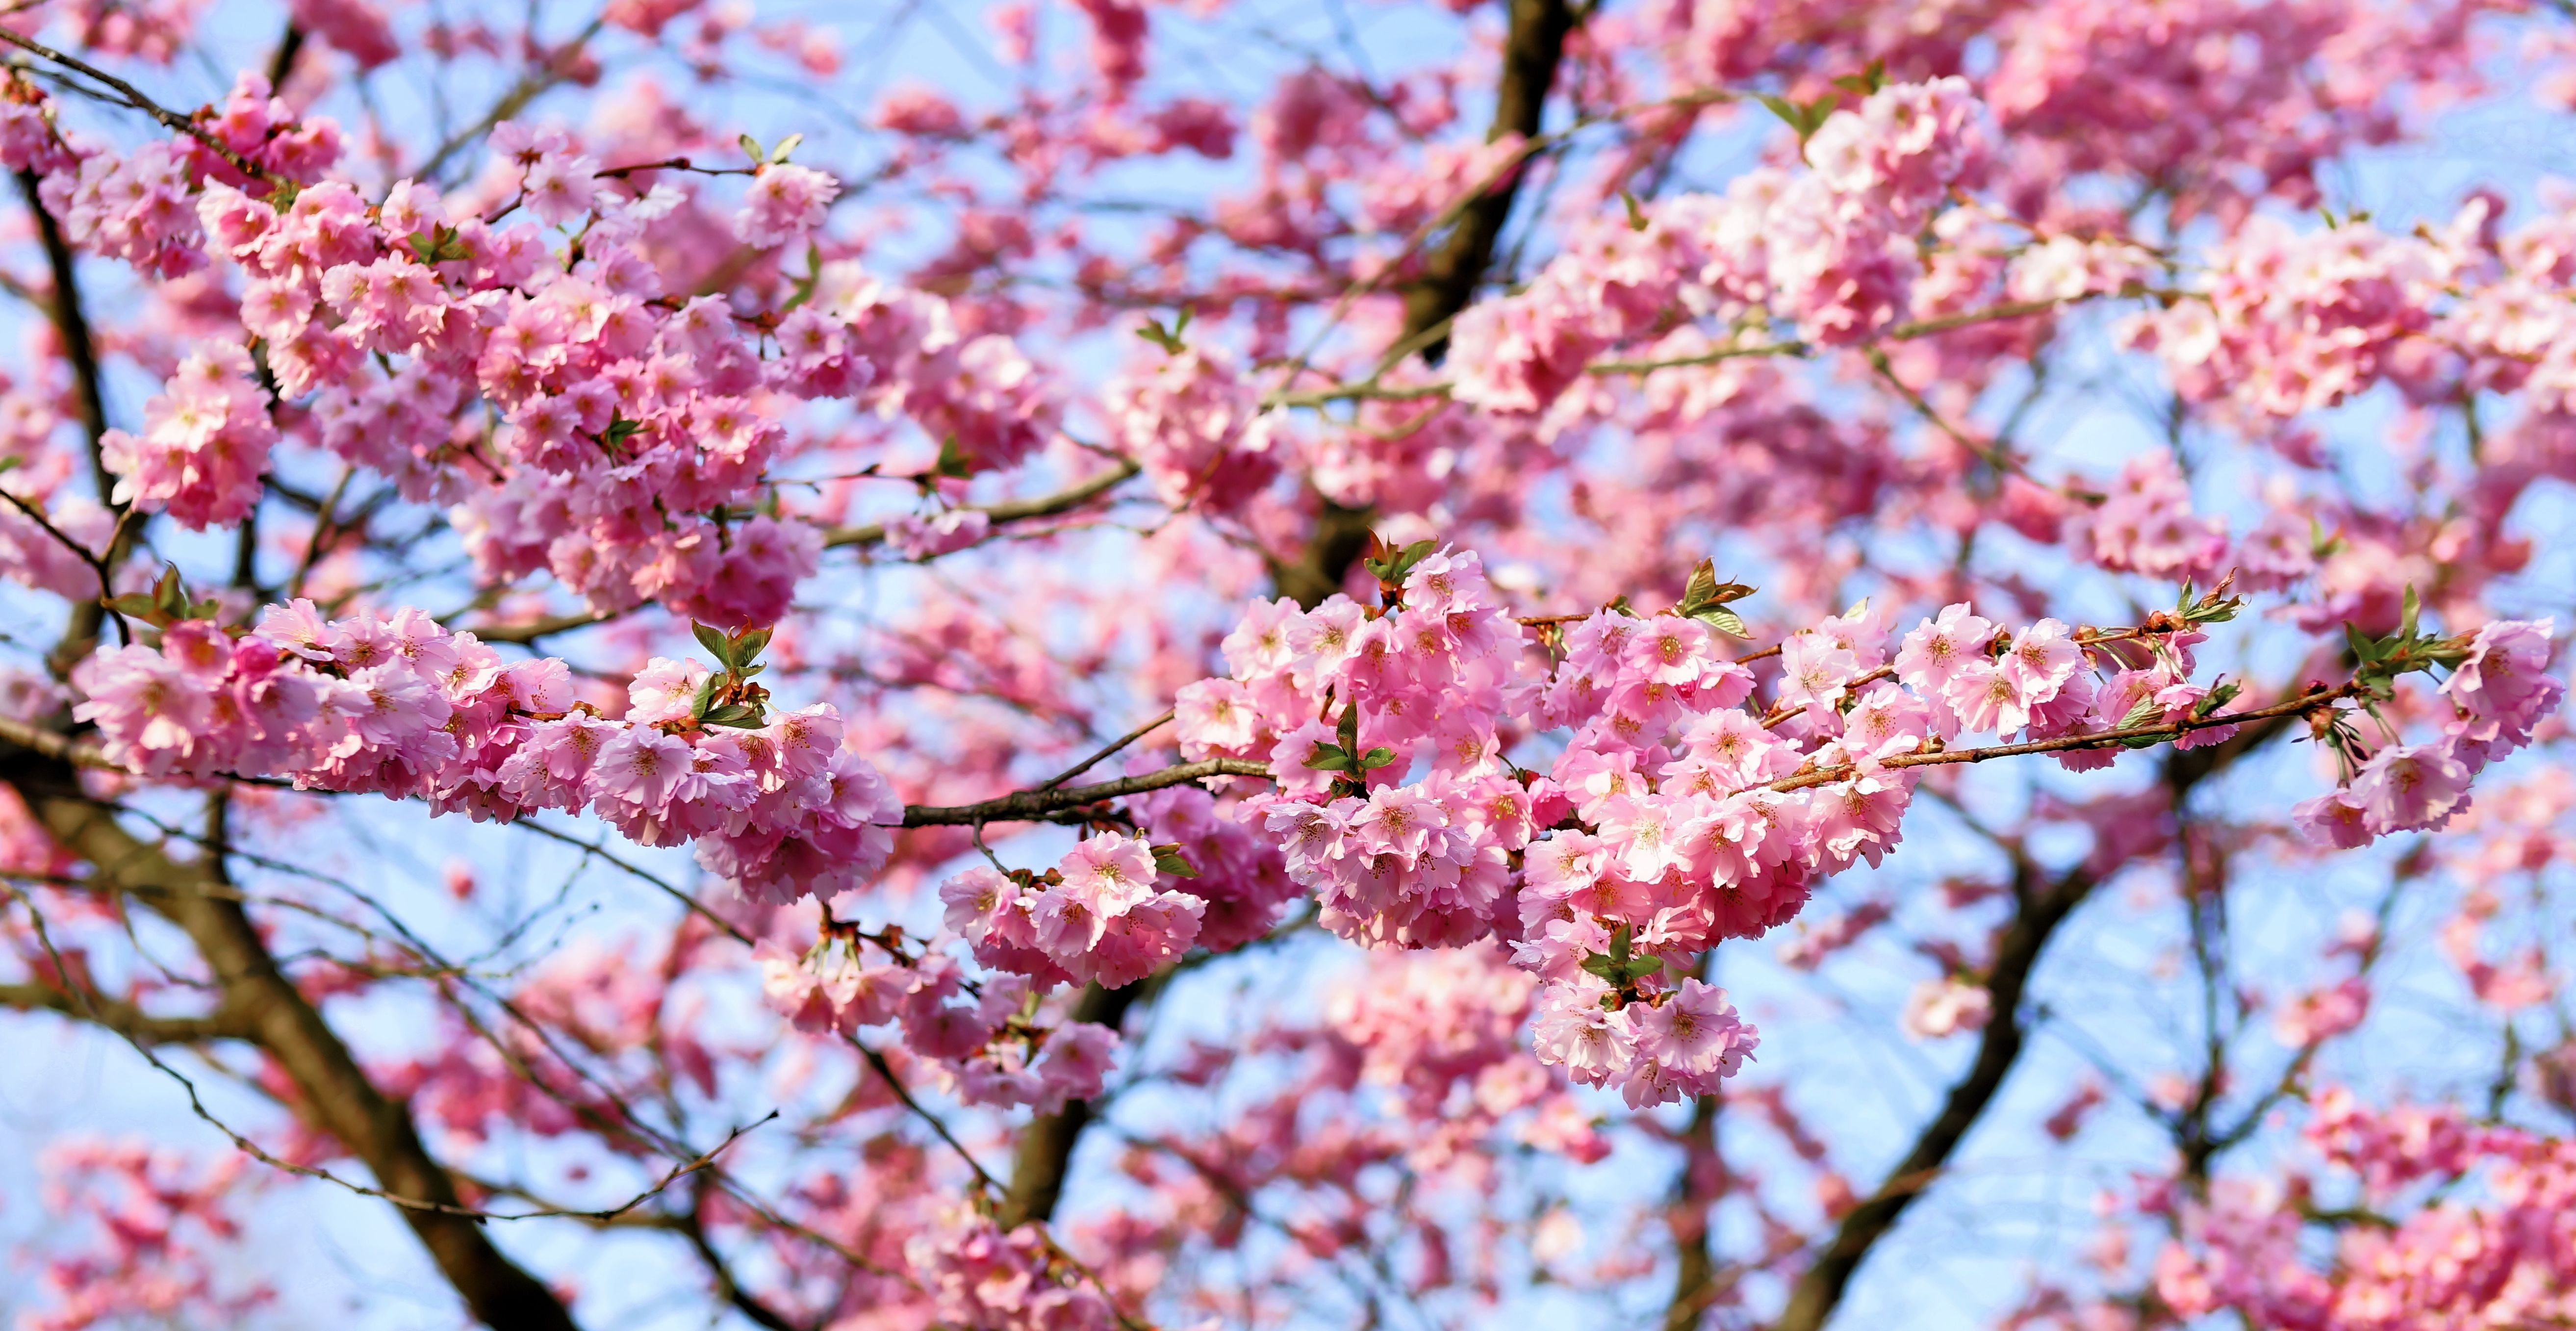 pink cherry blossom in bloom at daytime